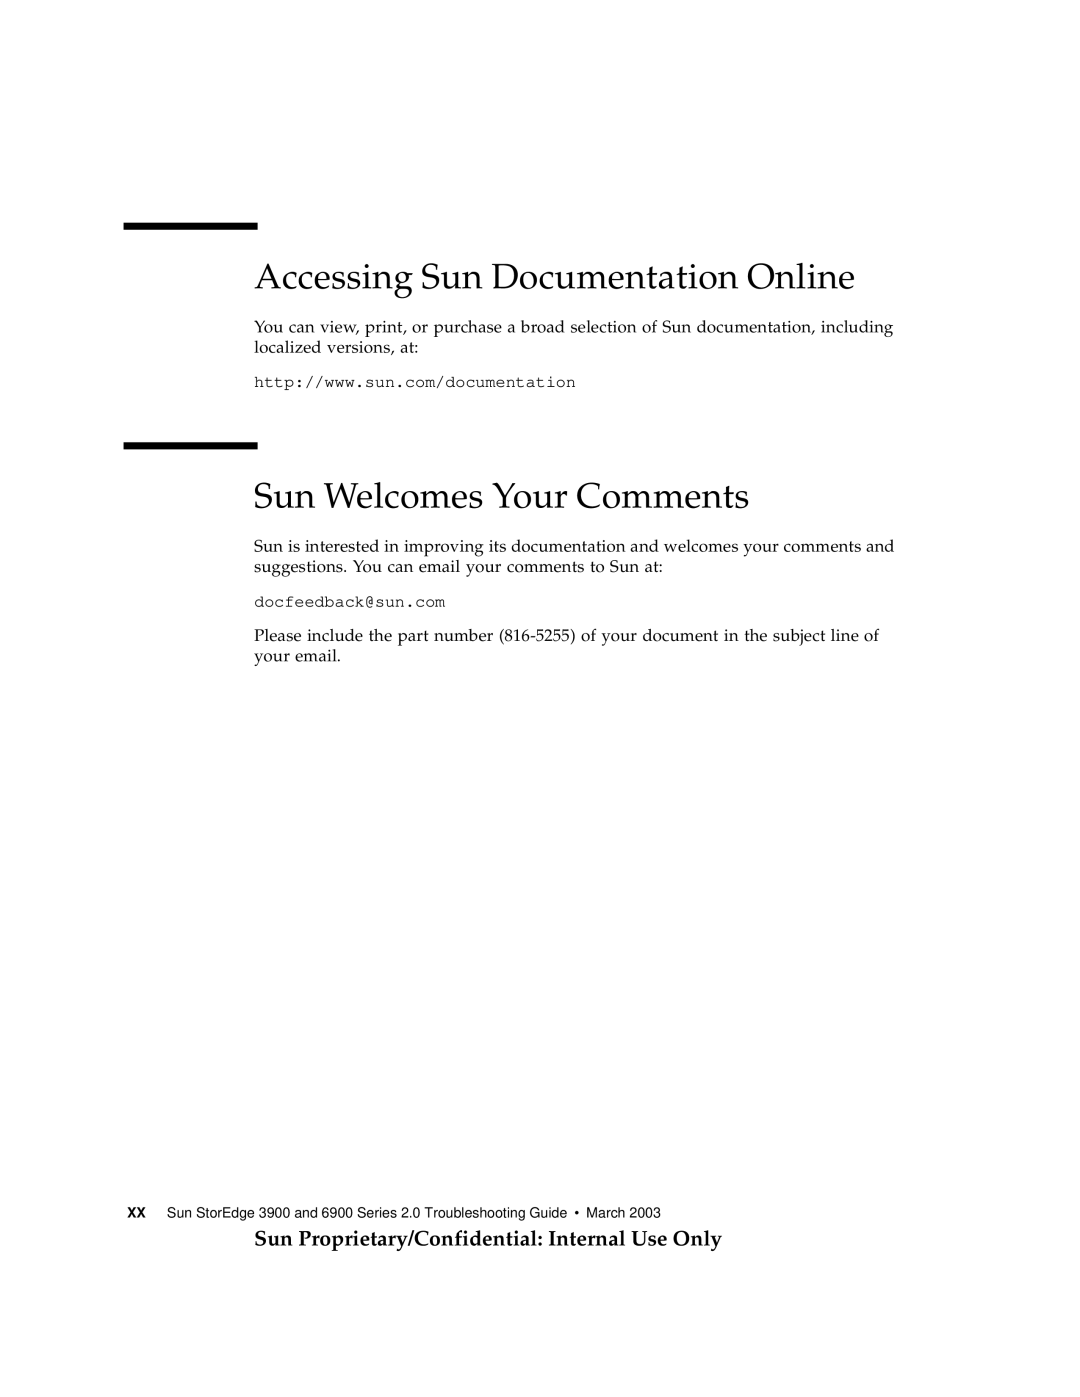 Sun Microsystems 3900, 6900 manual Accessing Sun Documentation Online, Sun Welcomes Your Comments, docfeedback@sun.com 